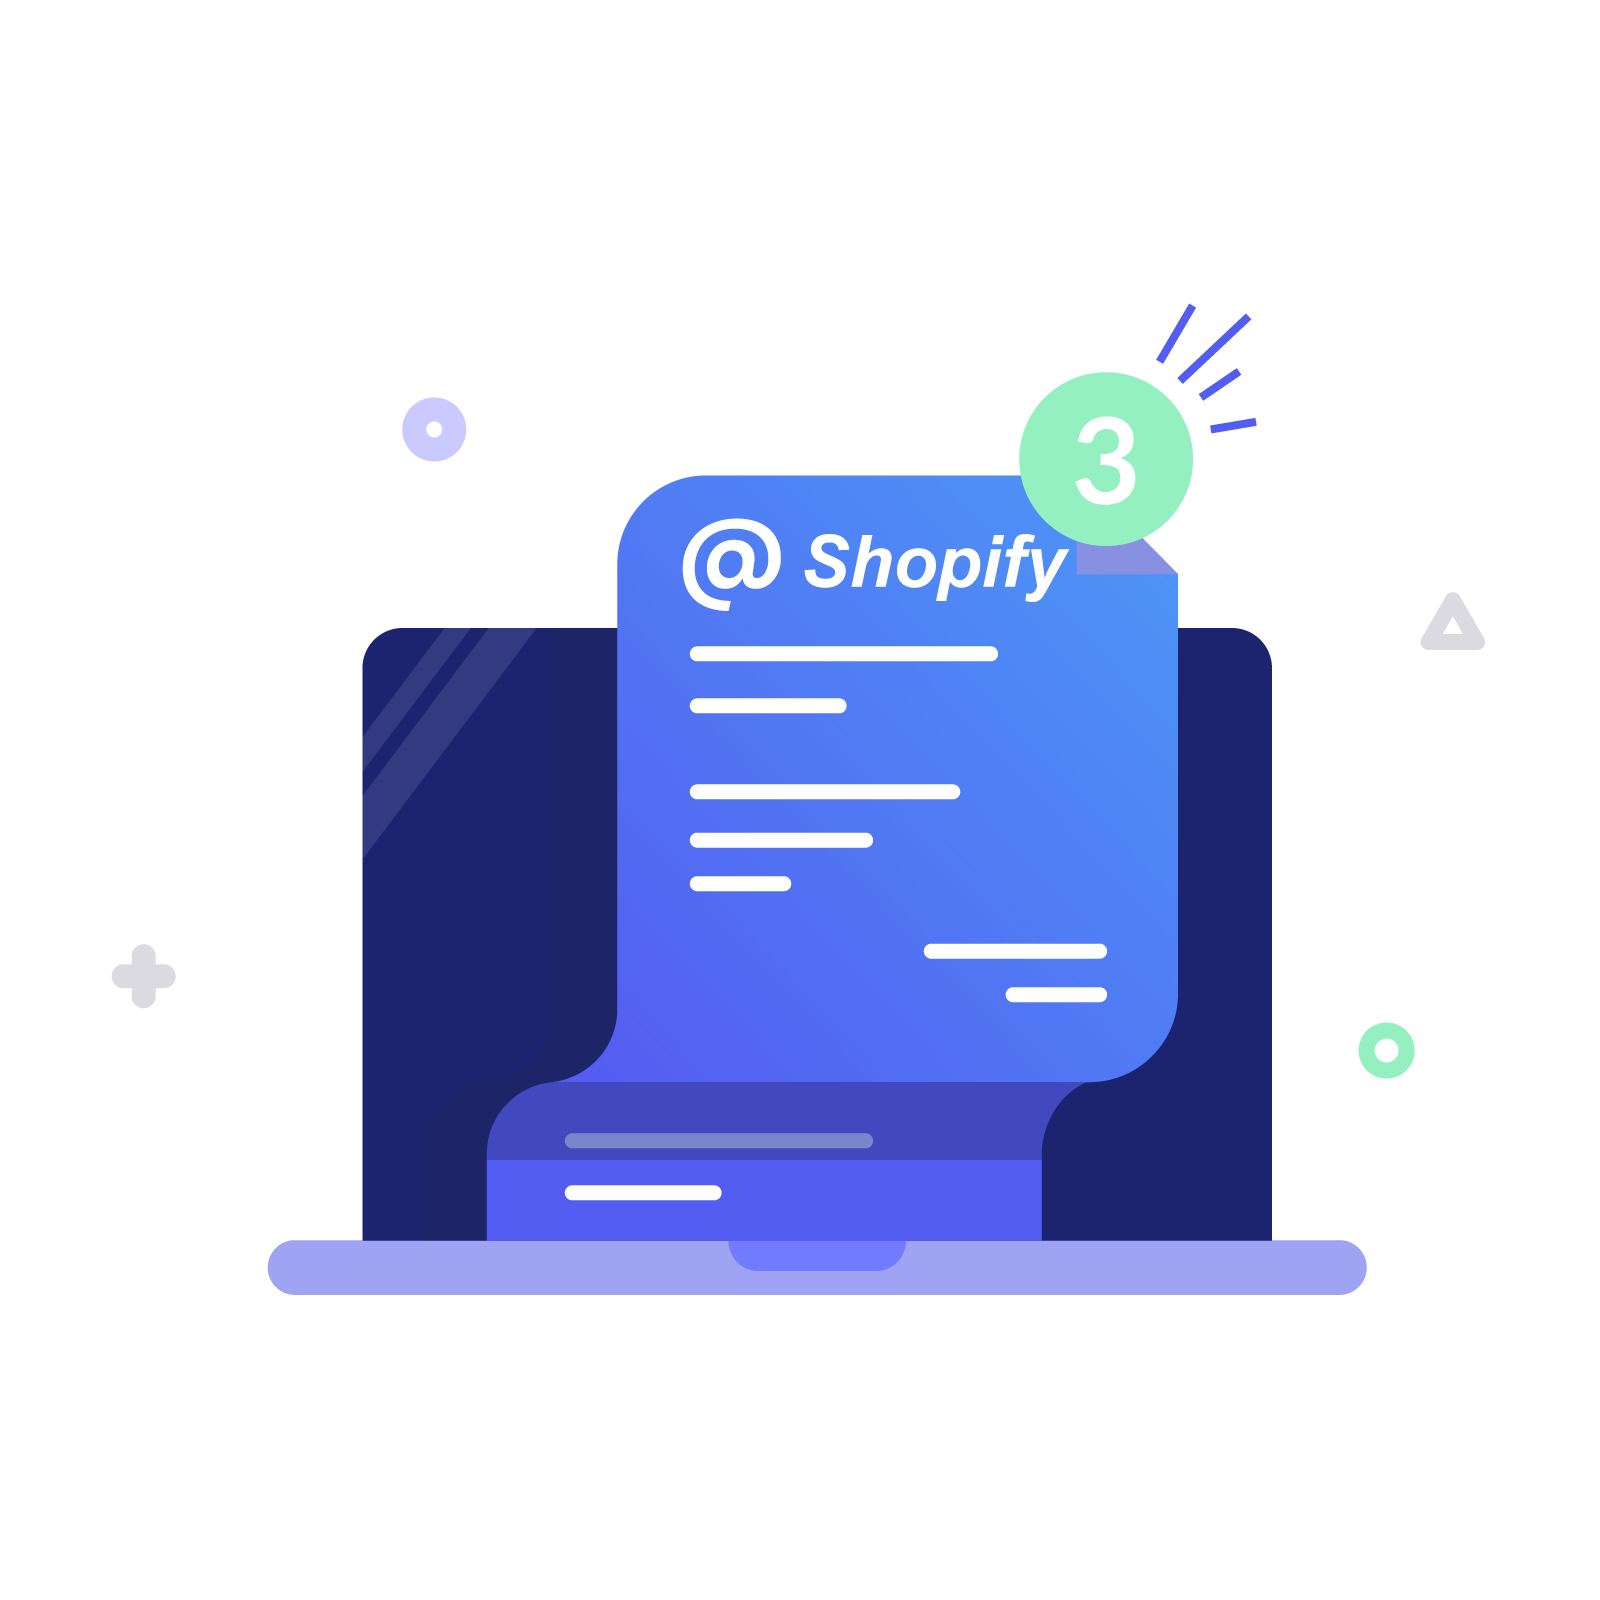 Is Shopify the right option?